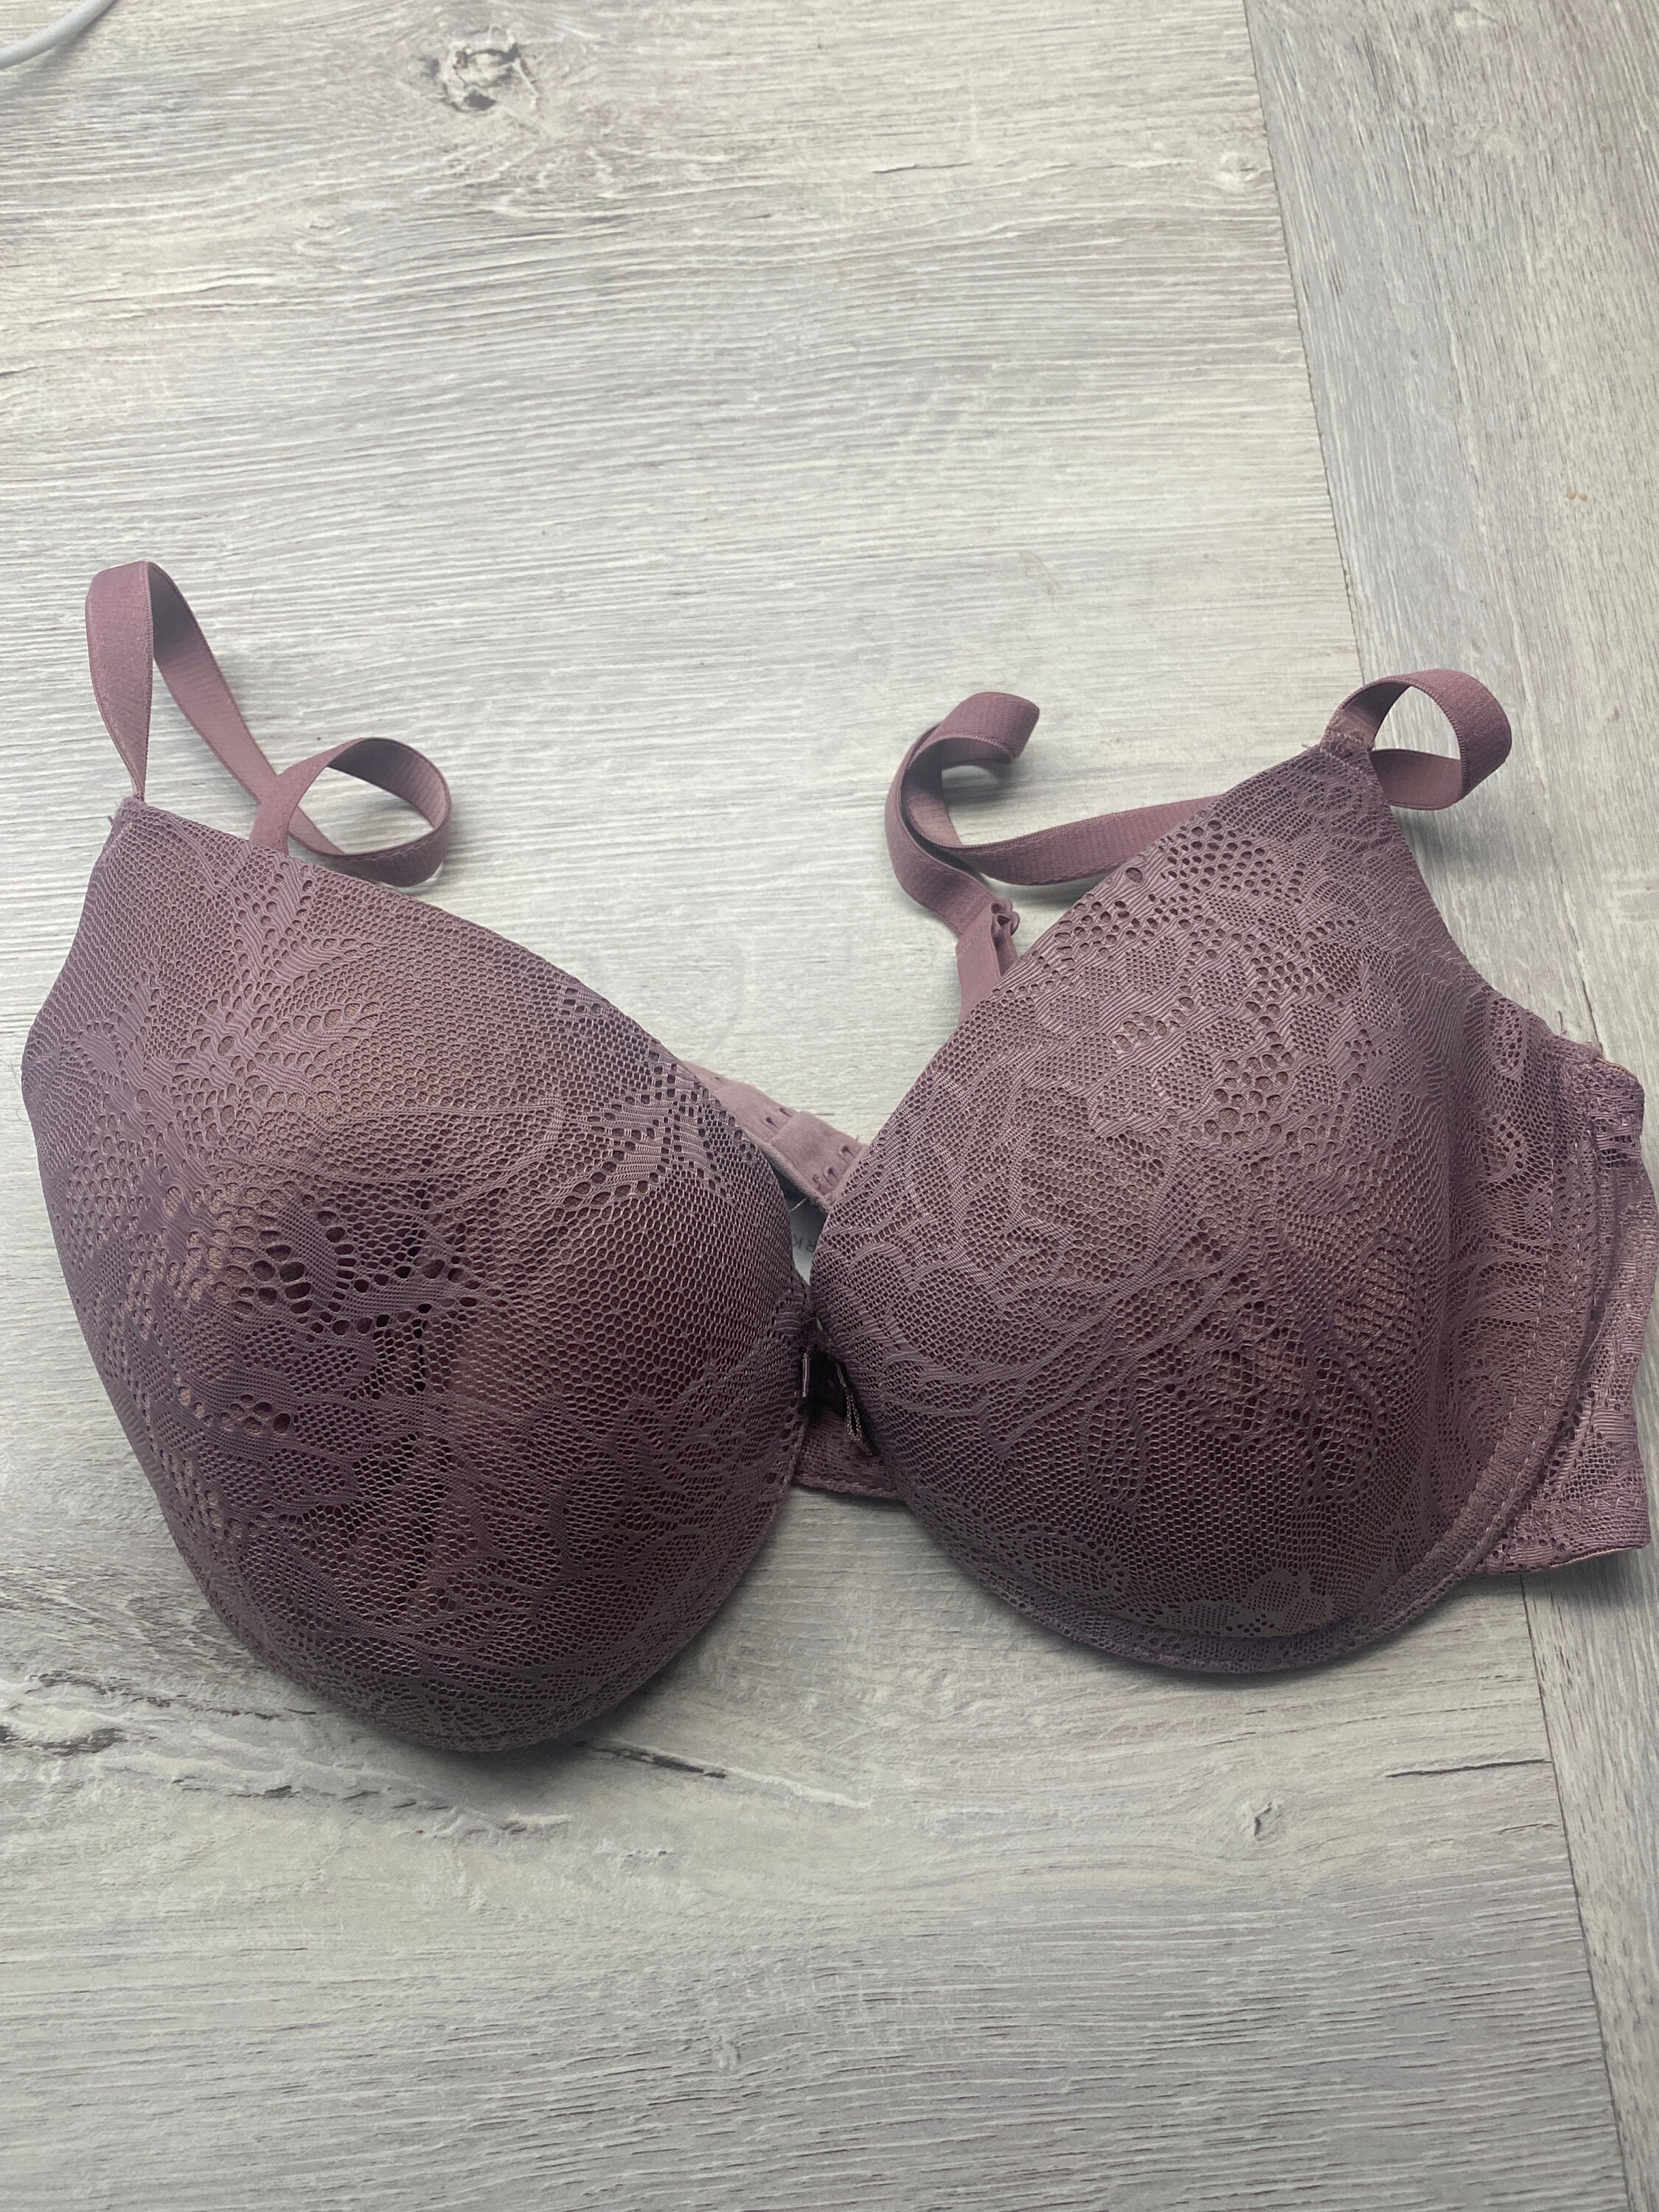 Victorias Secret bra 34D sheer push up without padding unlined taupe stripes